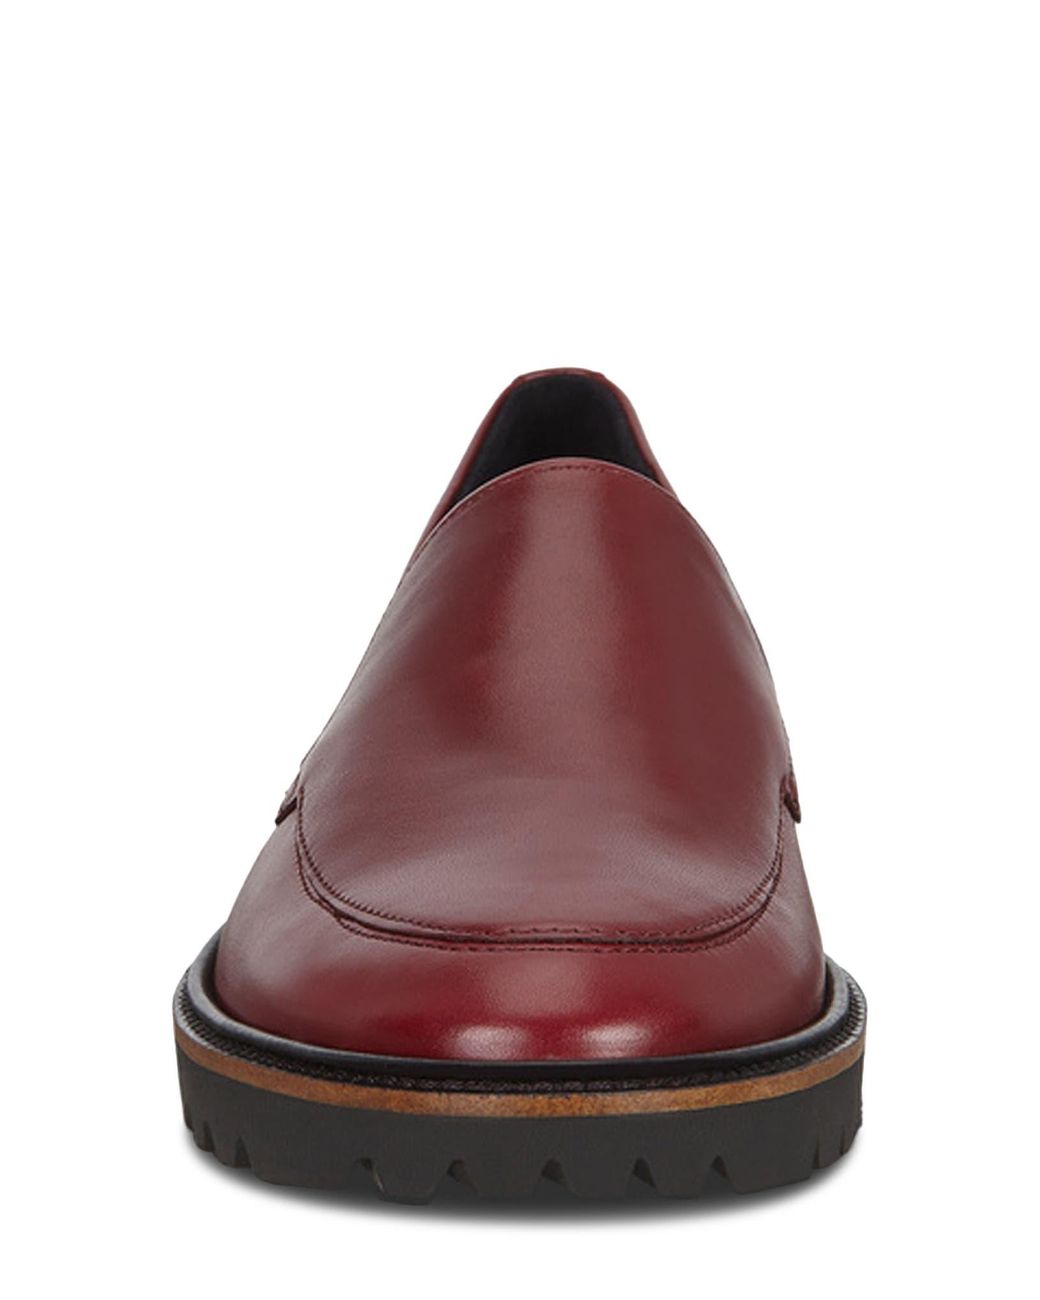 Ecco Loafer In Syrah Leather At Nordstrom | Lyst